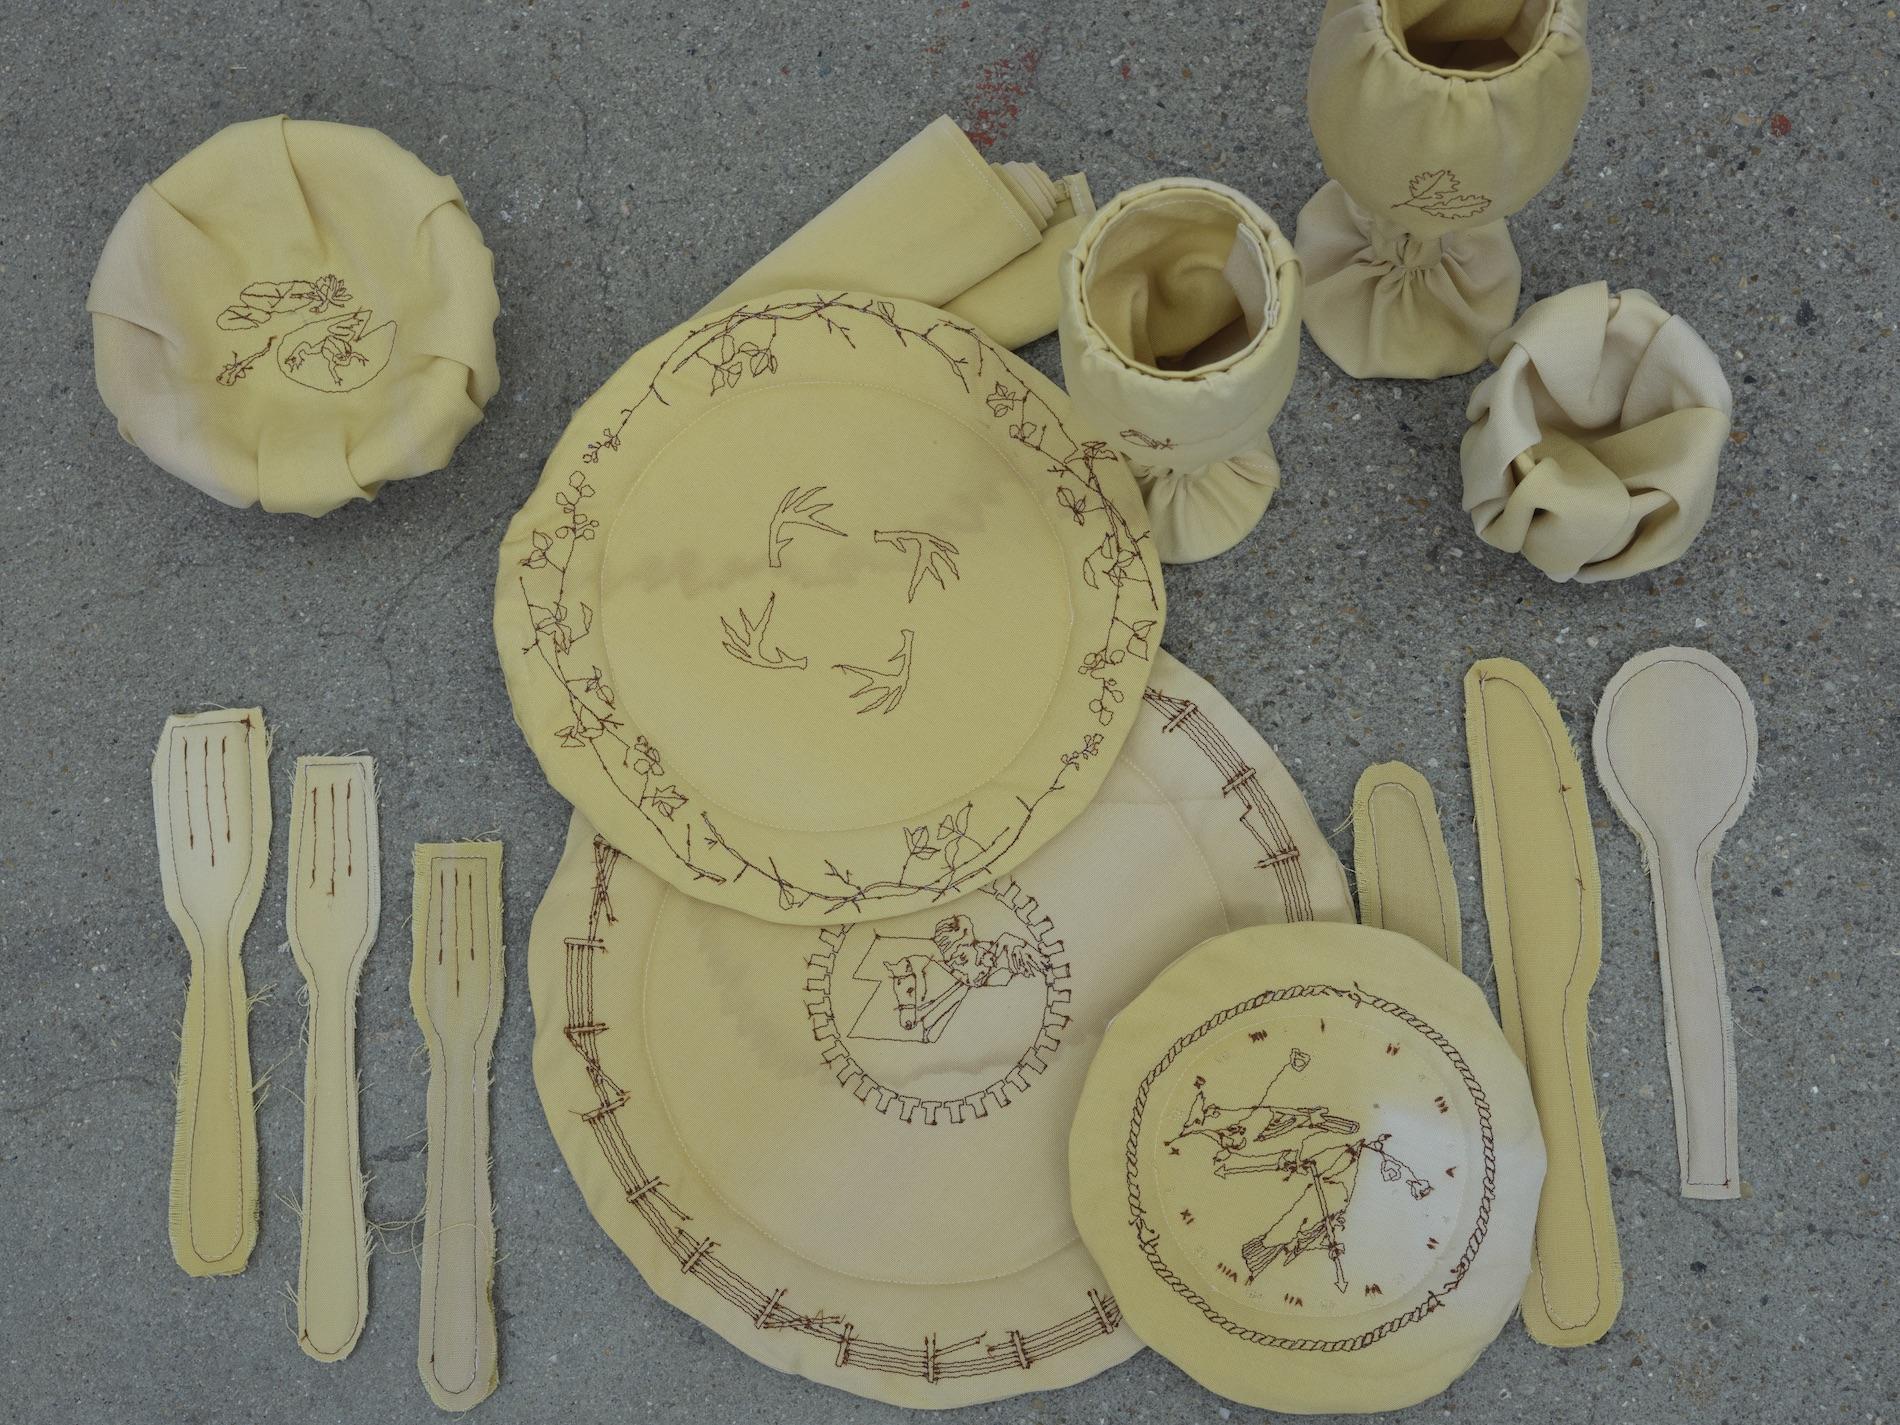 Full Dinnerware Soft-Sculpture Series, 2022, archival family textiles, embroidery. Meghan Murphy